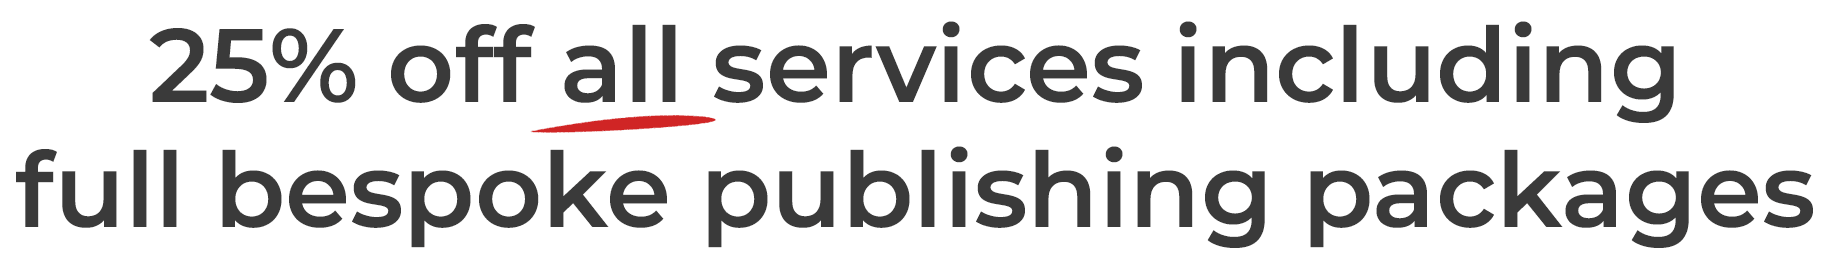 25 % off all services including bespoke publishing packages